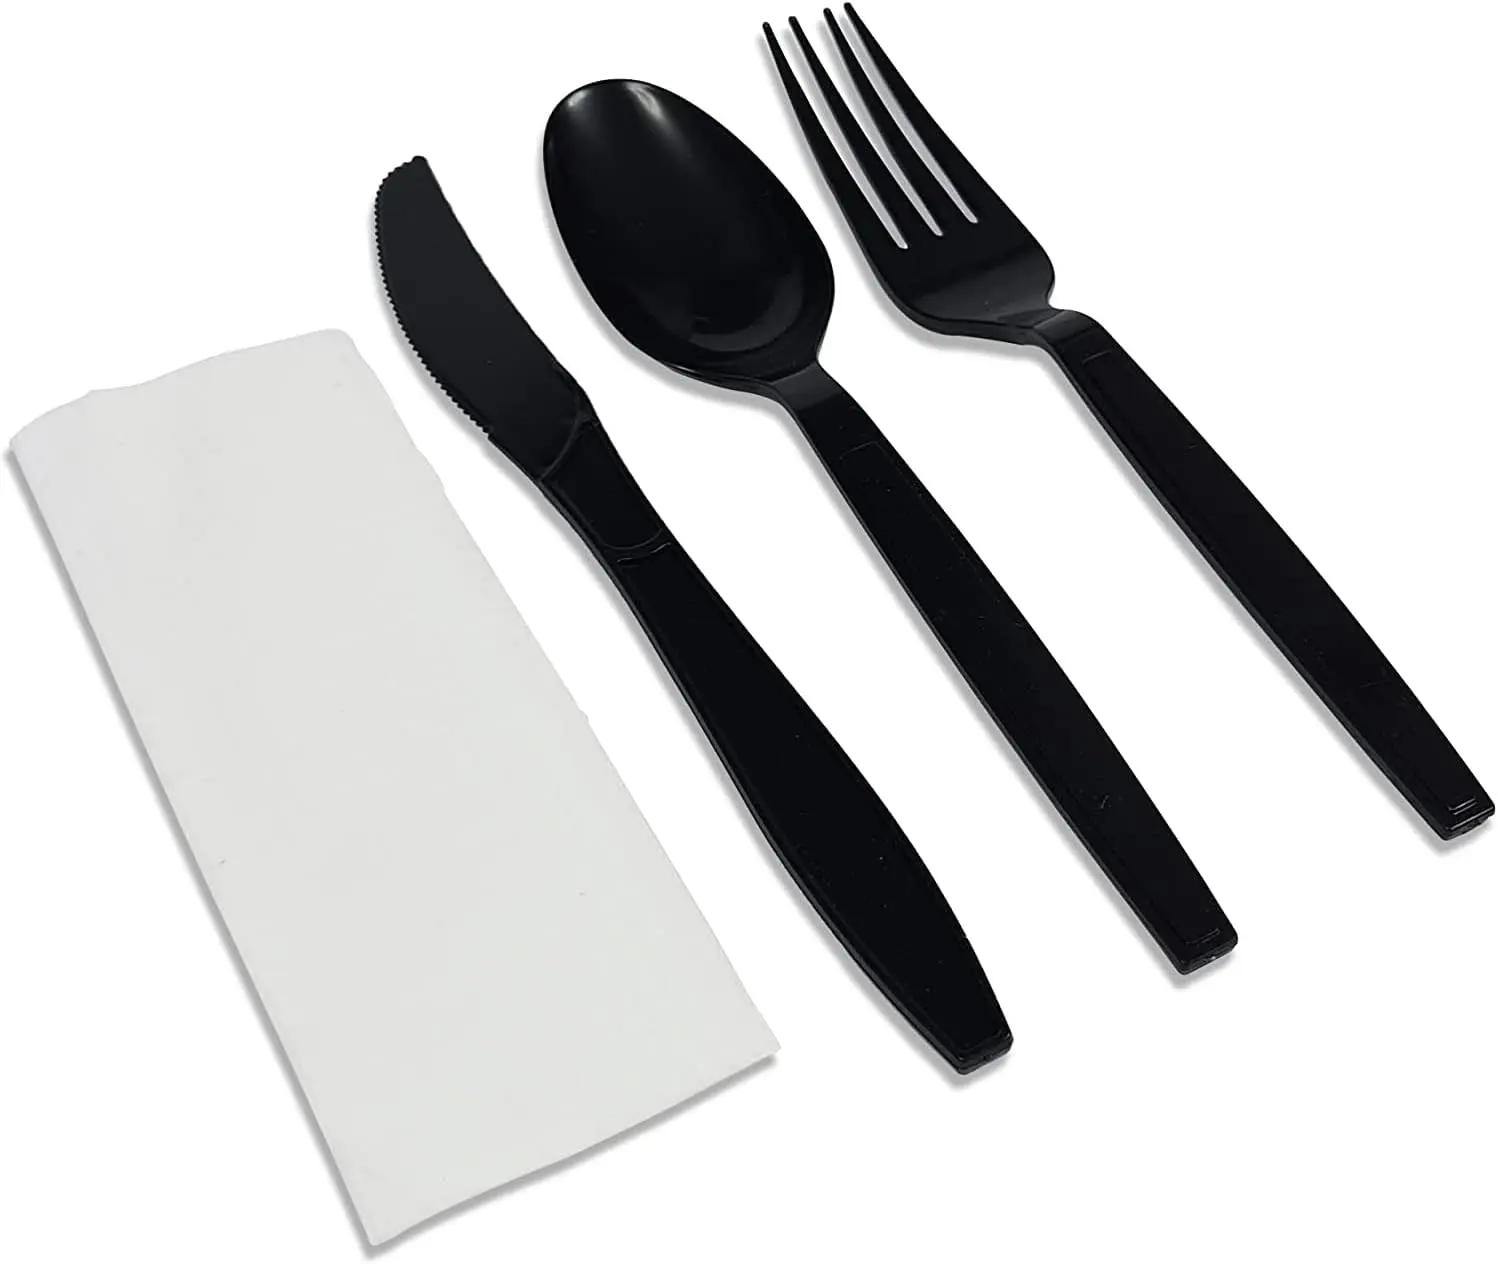 250 Plastic Cutlery Packets - Knife Fork Spoon Napkin Salt Pepper Sets | White Individually Wrapped Cutlery Kits